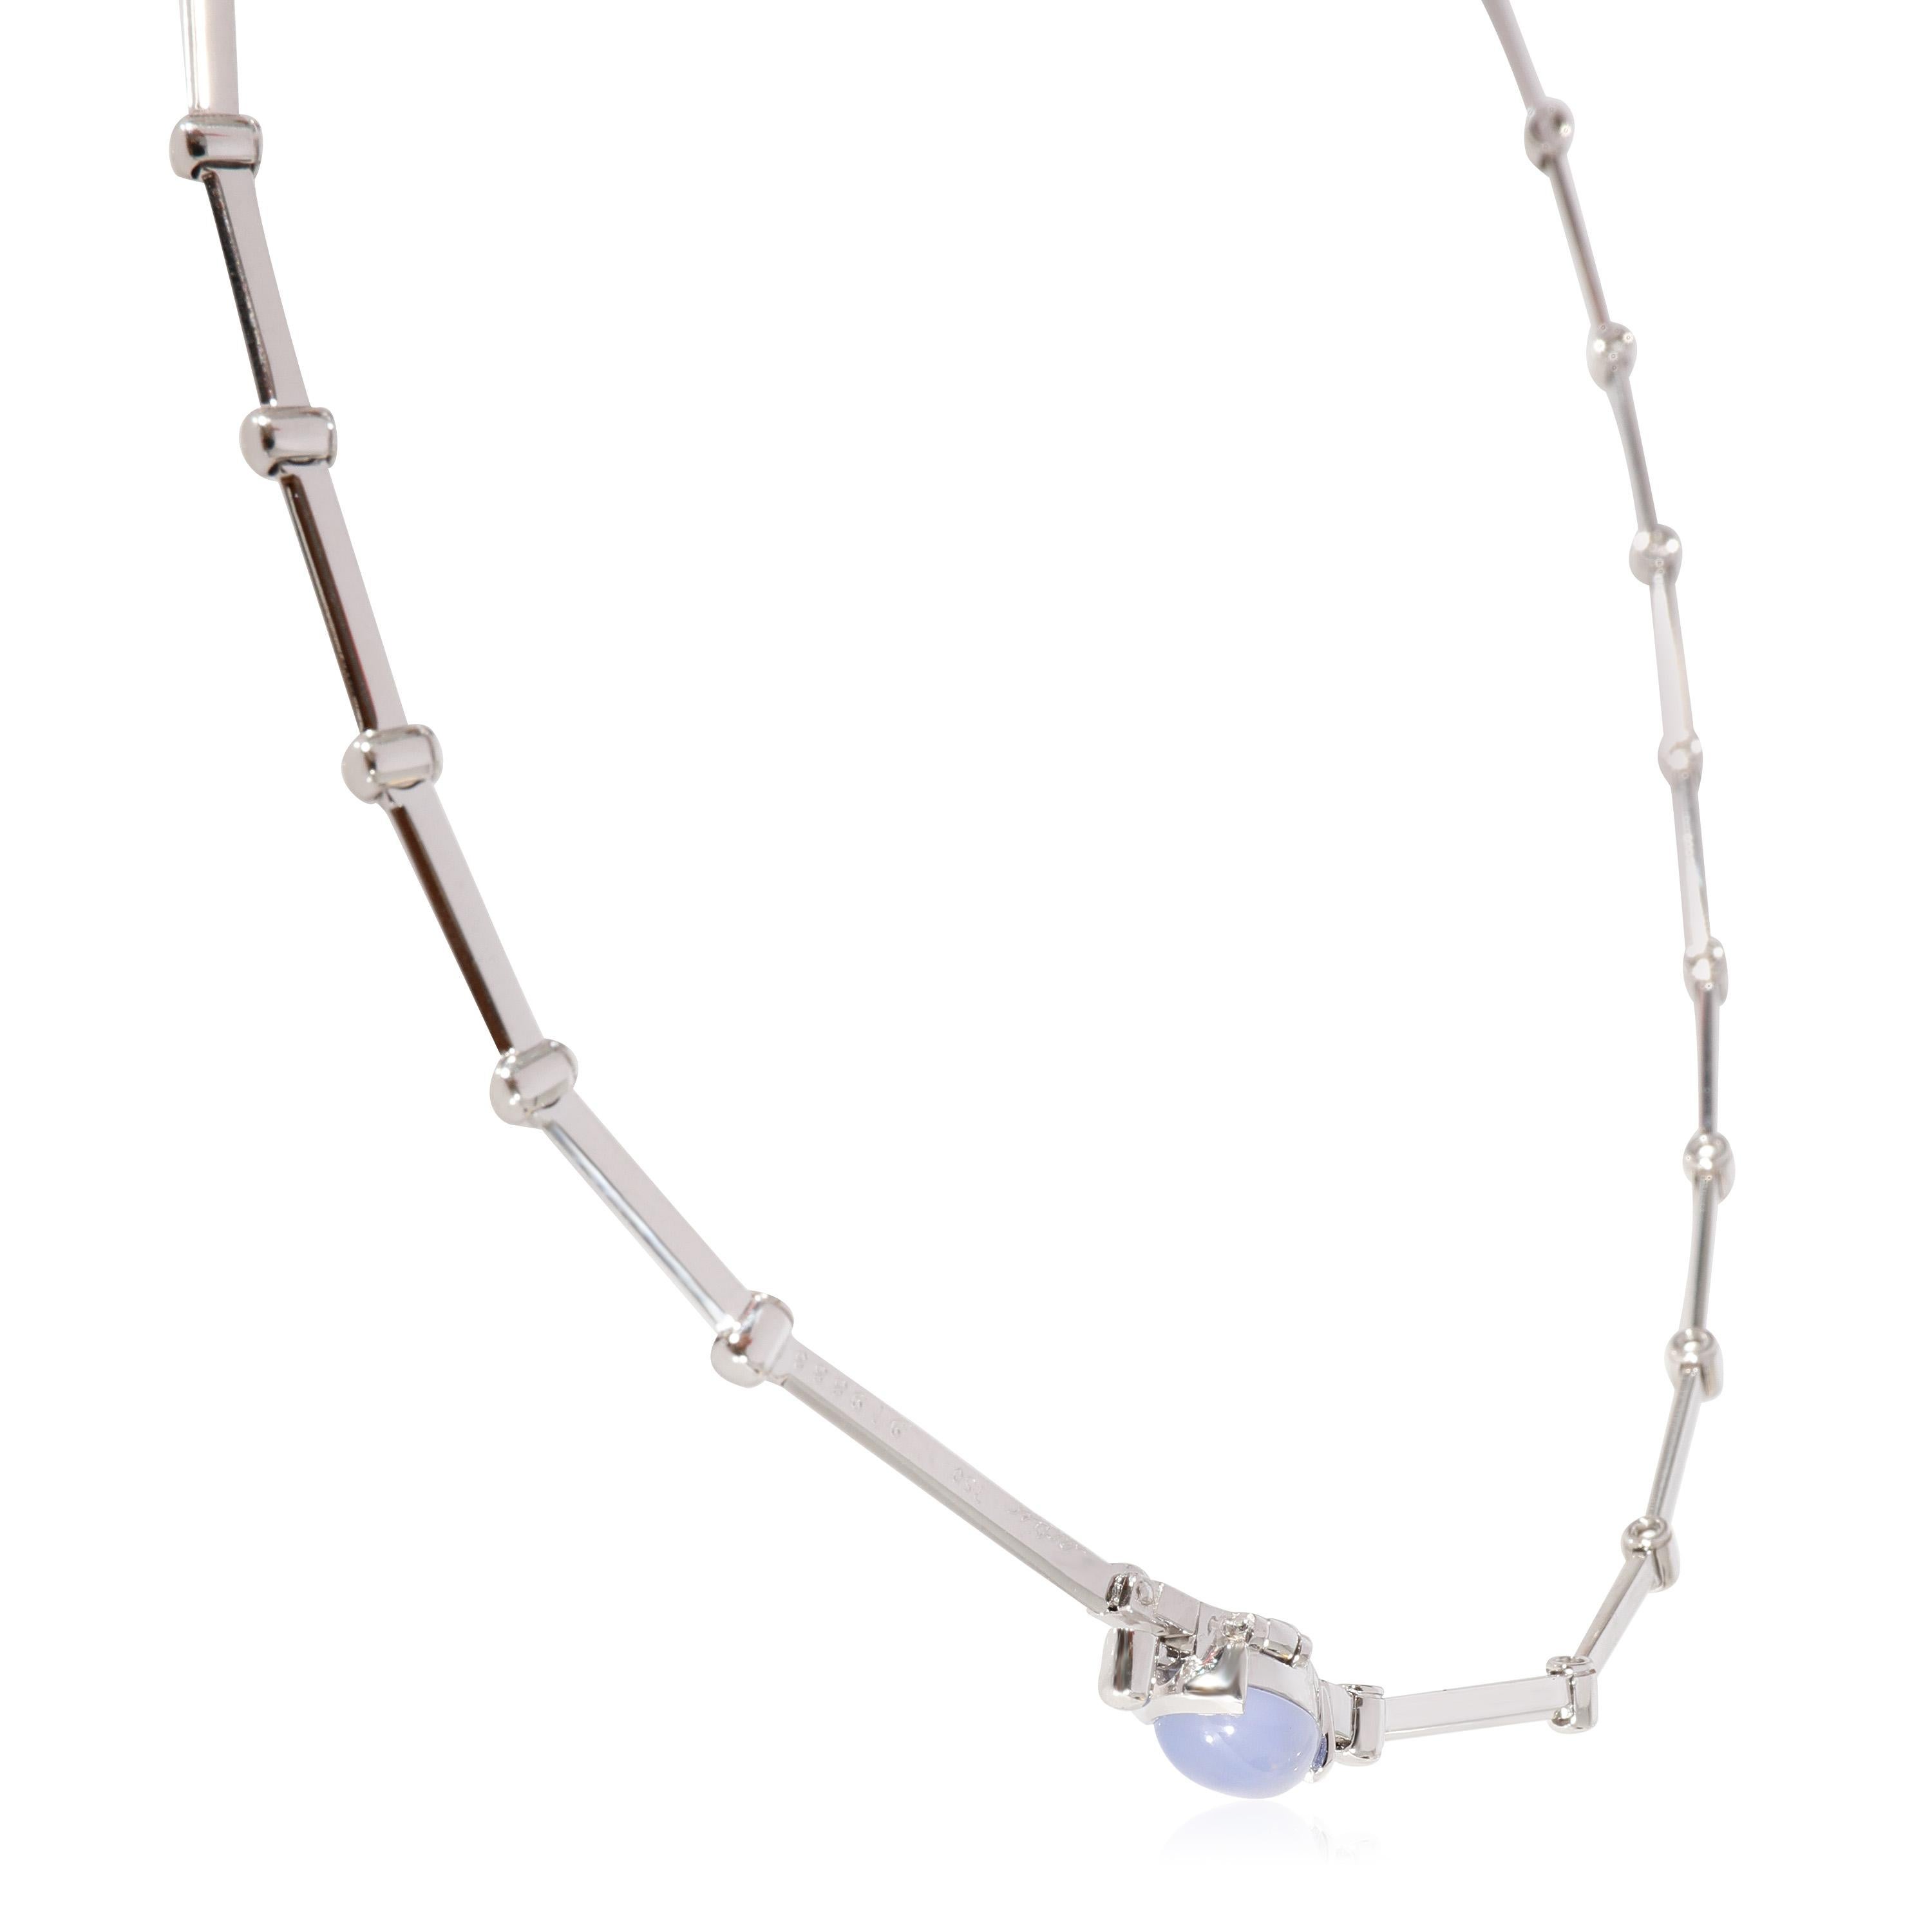 Cartier Meli Melo Diamond Necklace in 18k White Gold 0.3 CTW

PRIMARY DETAILS
SKU: 123412
Listing Title: Cartier Meli Melo Diamond Necklace in 18k White Gold 0.3 CTW
Condition Description: Retails for 14800 USD. In excellent condition and recently